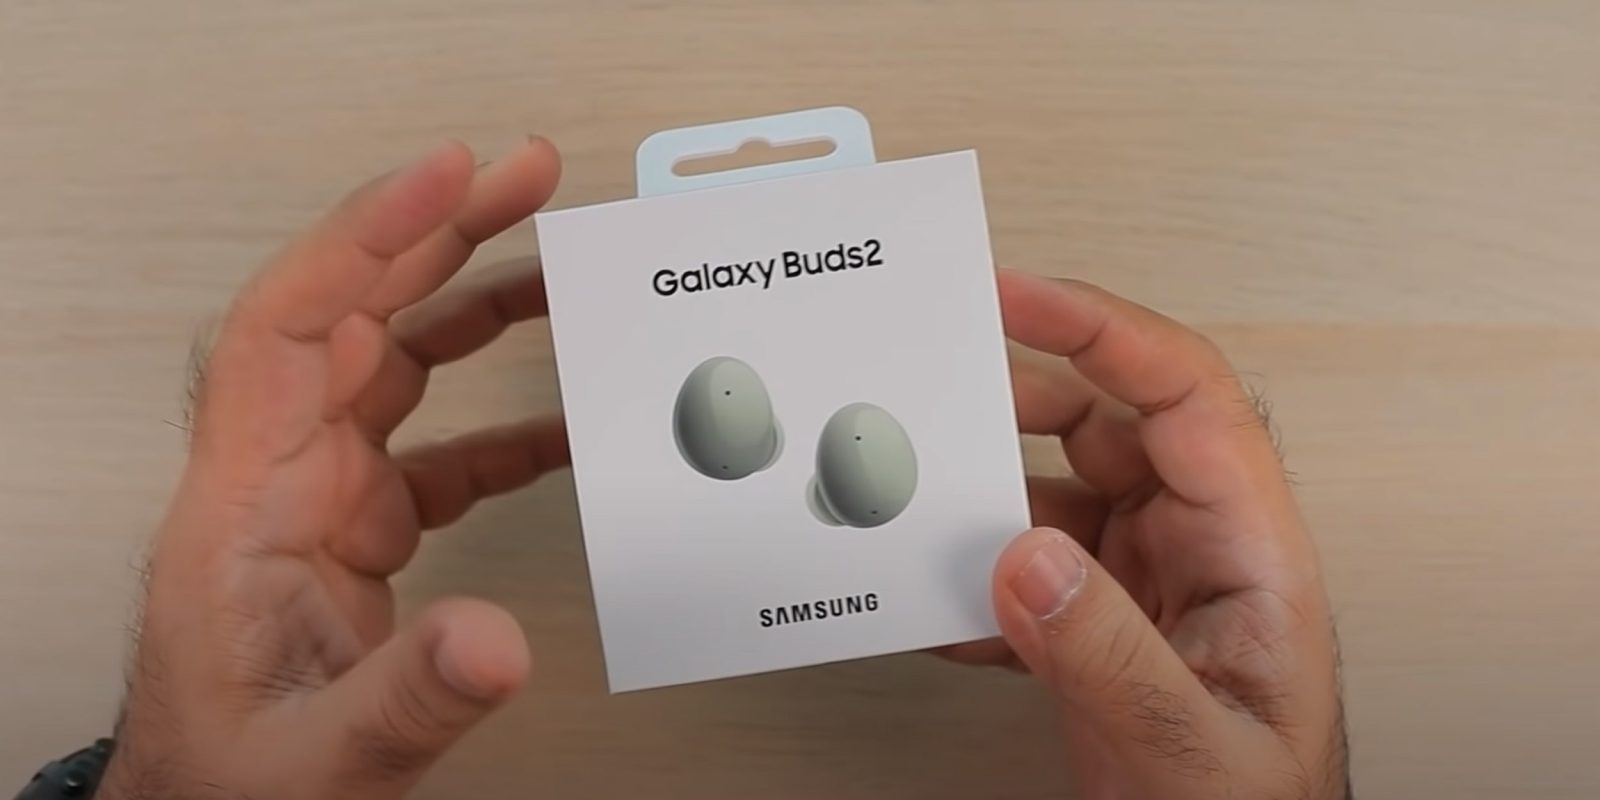 Galaxy Buds 2 unboxing video